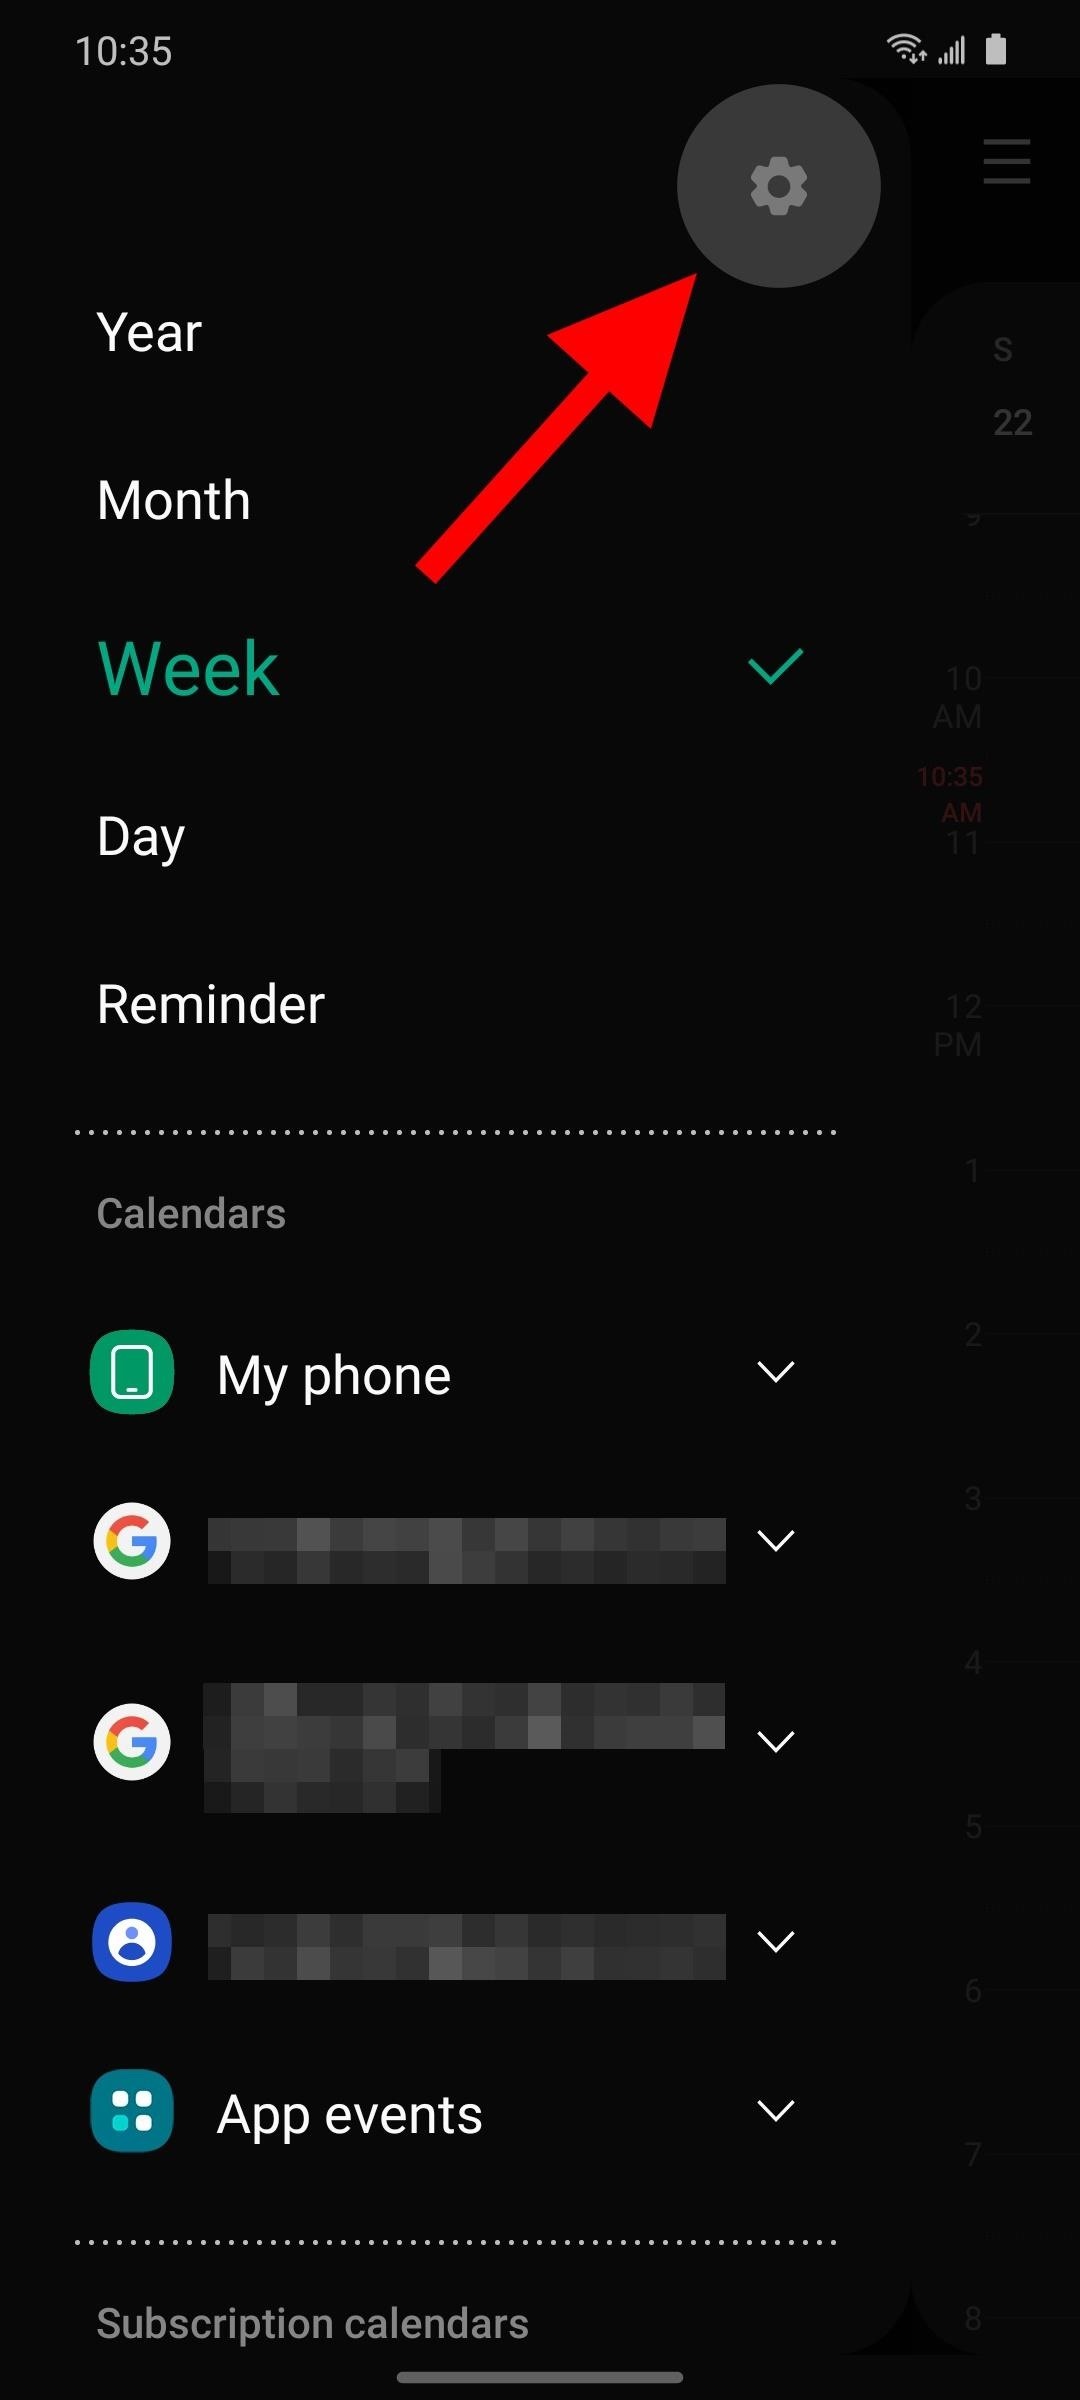 How to Disable the Full-Screen Calendar Alerts on Your Samsung Galaxy Phone